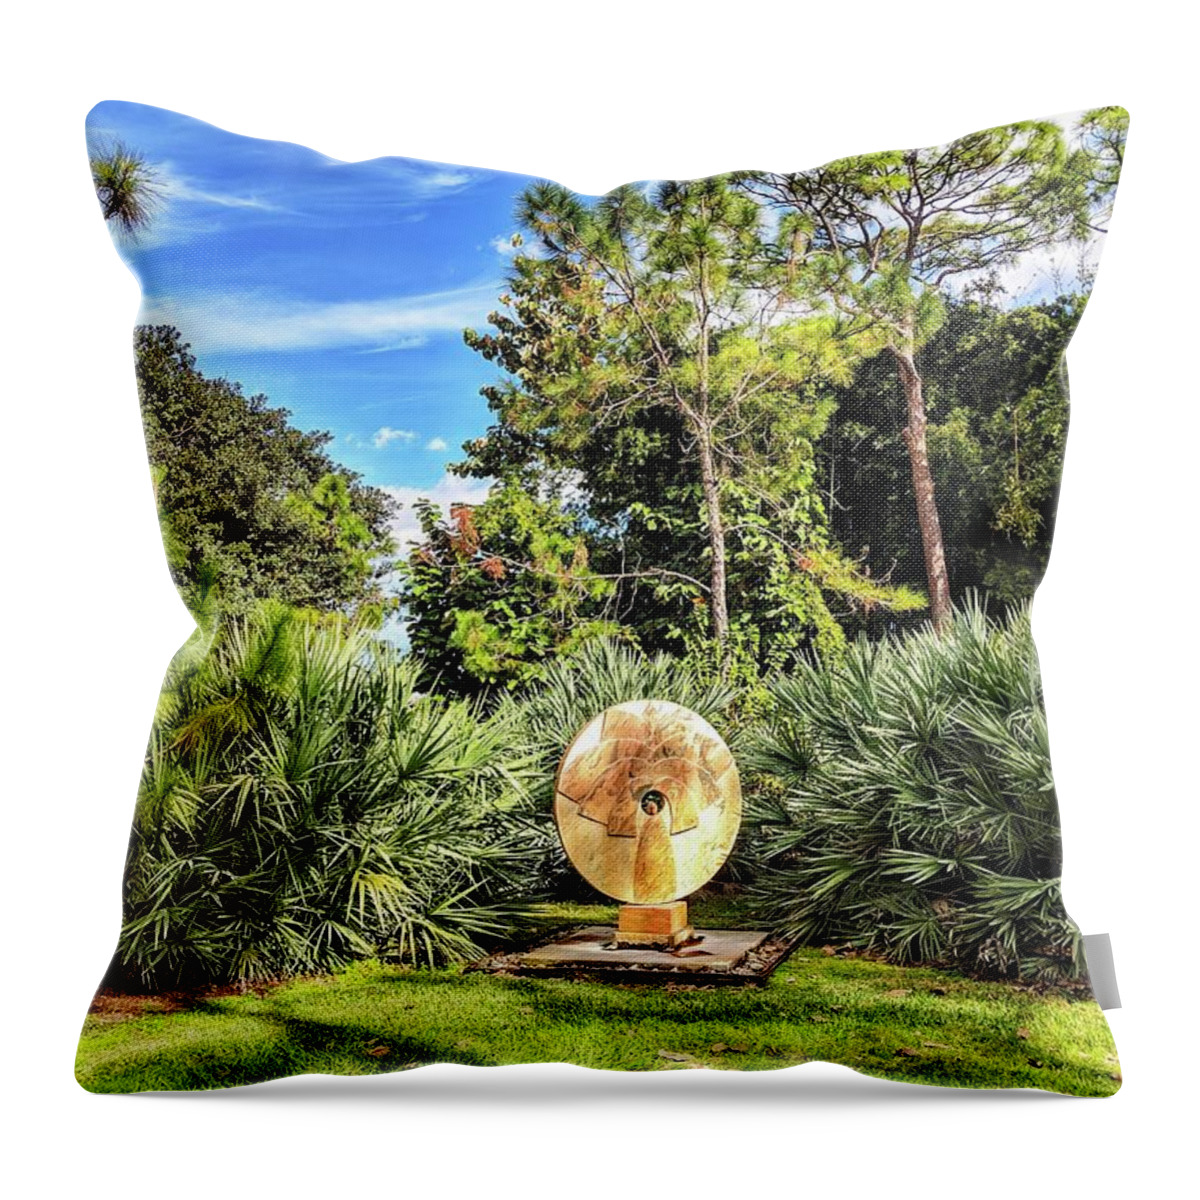 Sunny Throw Pillow featuring the photograph Shine Bright by Portia Olaughlin